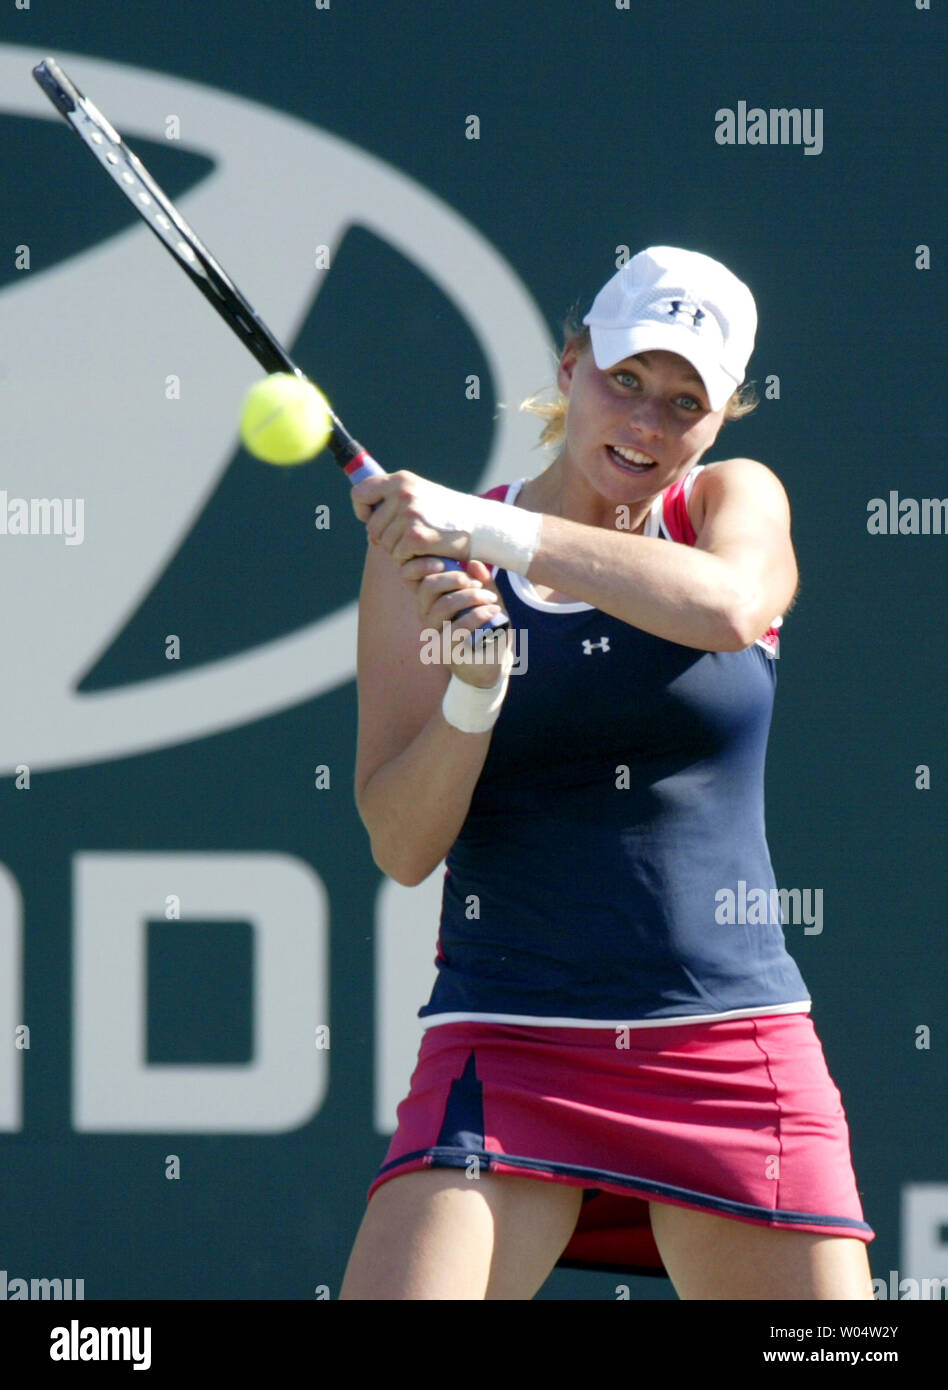 Vera Zvonareva of Russia hits a shot from the baseline against Michaella Krajicek of the Netherlands in the quarterfinals of the Family Circle Cup tennis tournament in Charleston, South Carolina on April 13, 2007. Zvonareva won the match 6-1, 7-5. (UPI Photo/Nell Redmond) Stock Photo